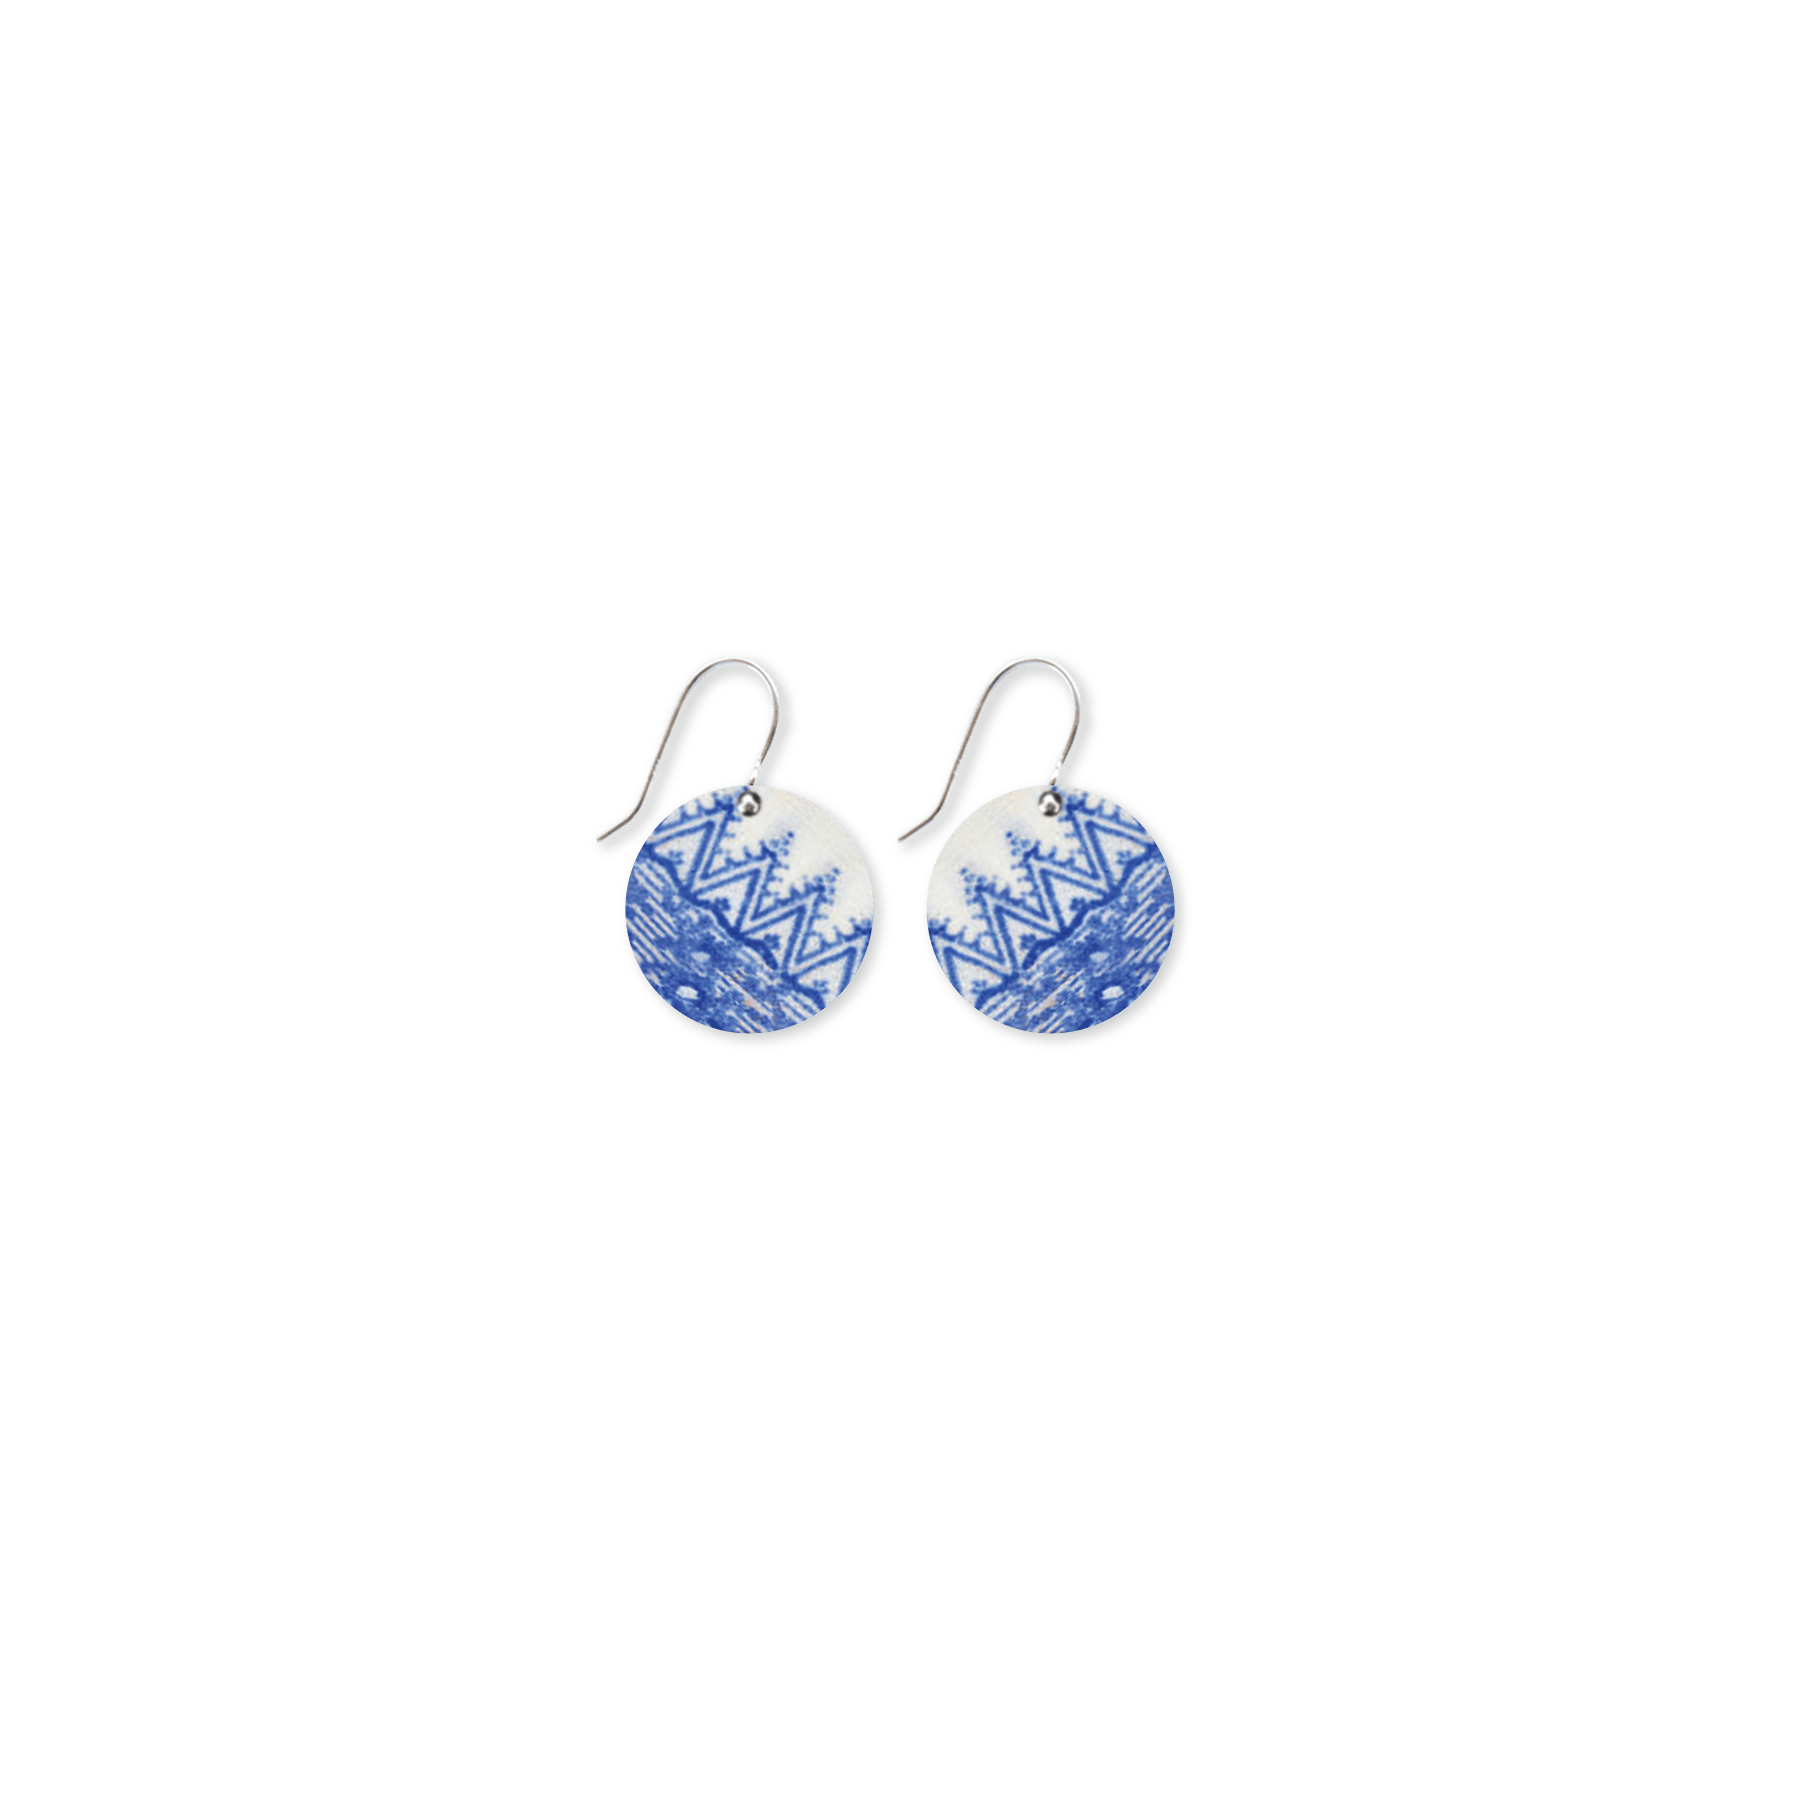 Museums of History NSW Ceramic Circle Drop Earrings